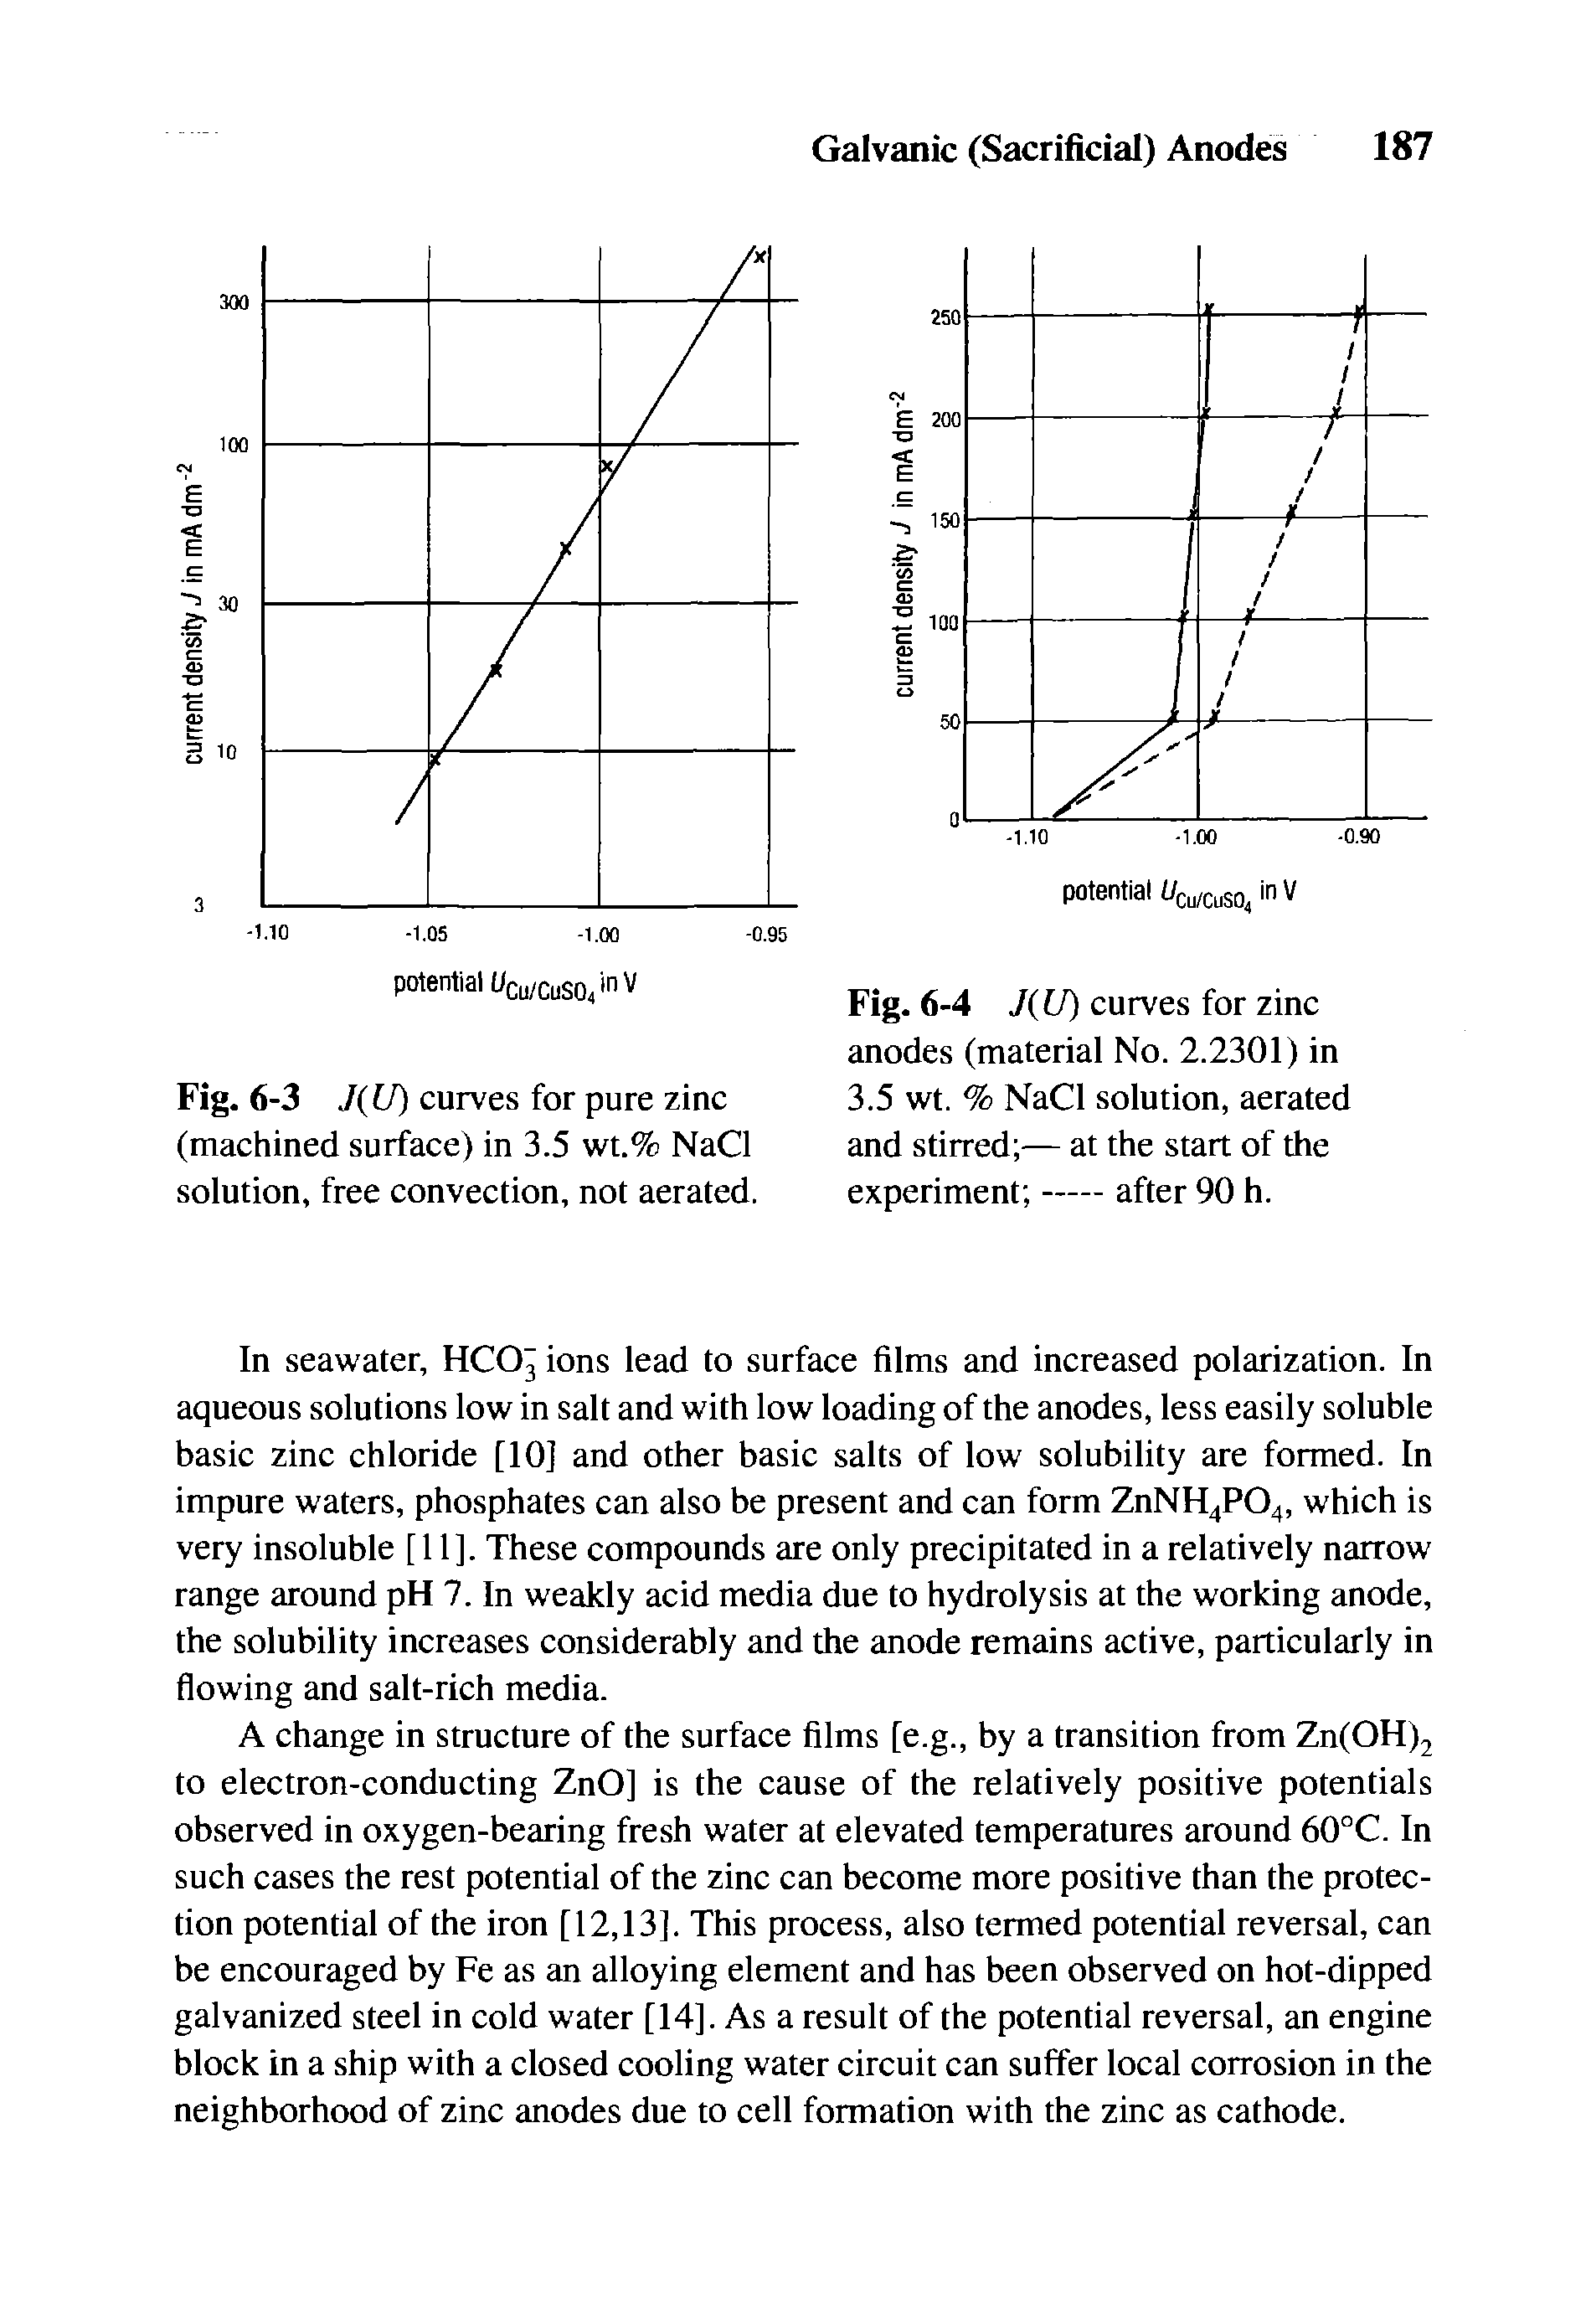 Fig. 6-4 J U) curves for zinc anodes (material No. 2.2301) in 3.5 wt. % NaCl solution, aerated and stirred — at the start of the experiment -----after 90 h.